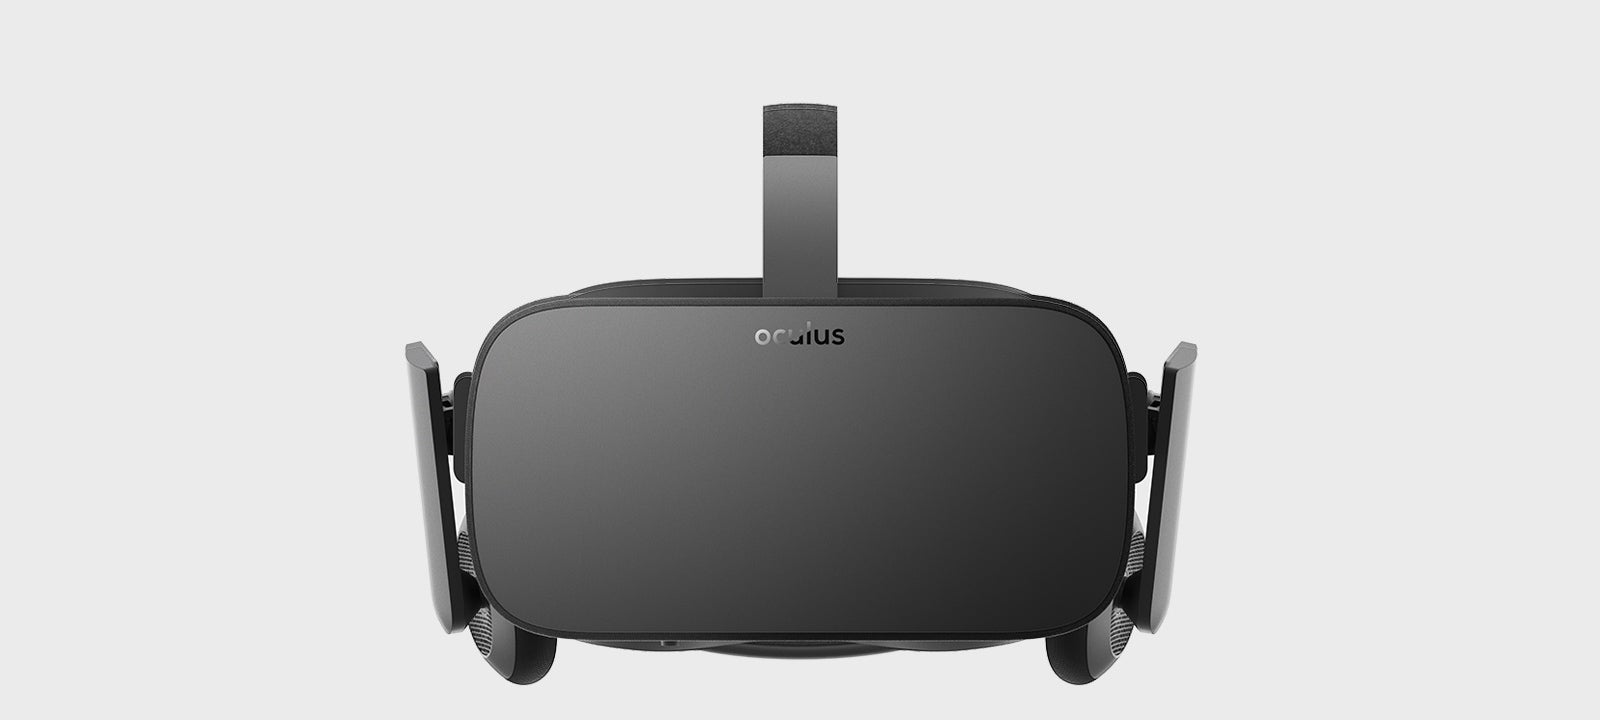 Oculus Rift now has lower minimum specs due to spacewarp" VR which sounds super fake but | VG247